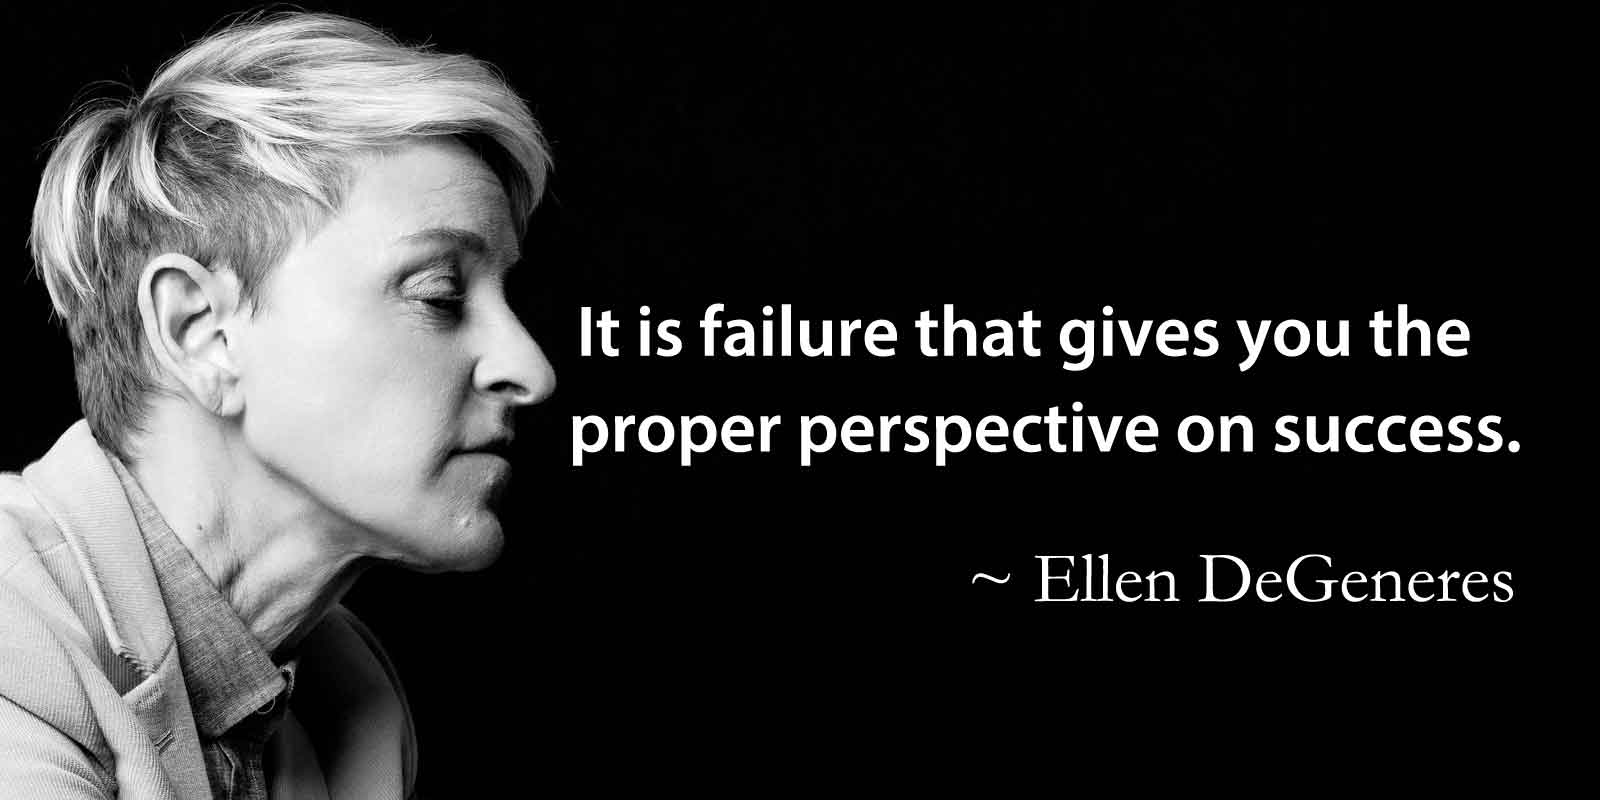 Ellen DeGeneres Quotes on Life and Success - Well Quo